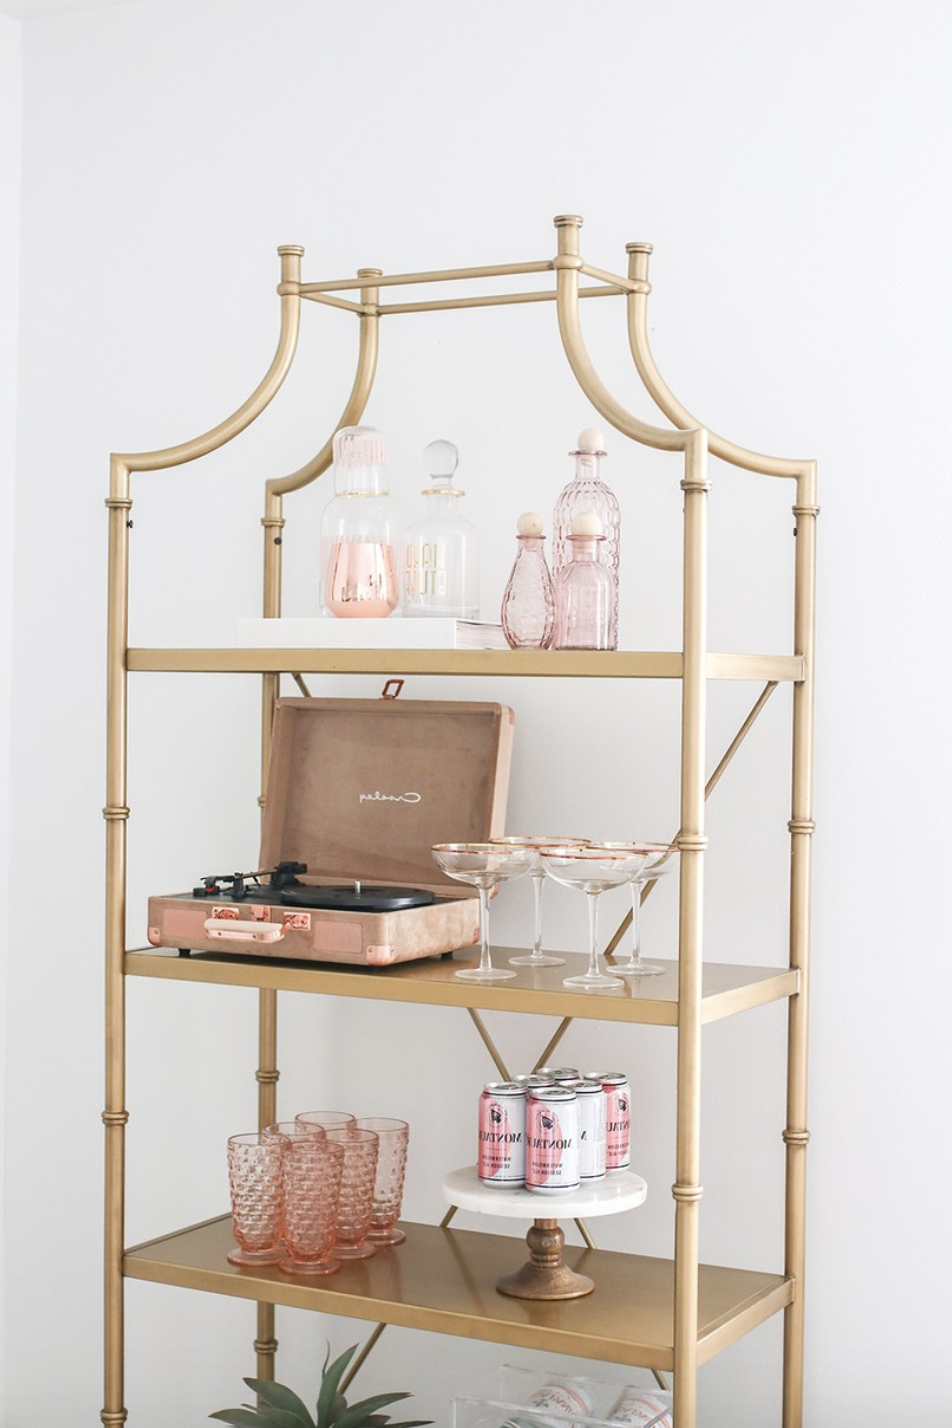 Gold Bookshelf Decor For The Bedroom And Living Room Gold